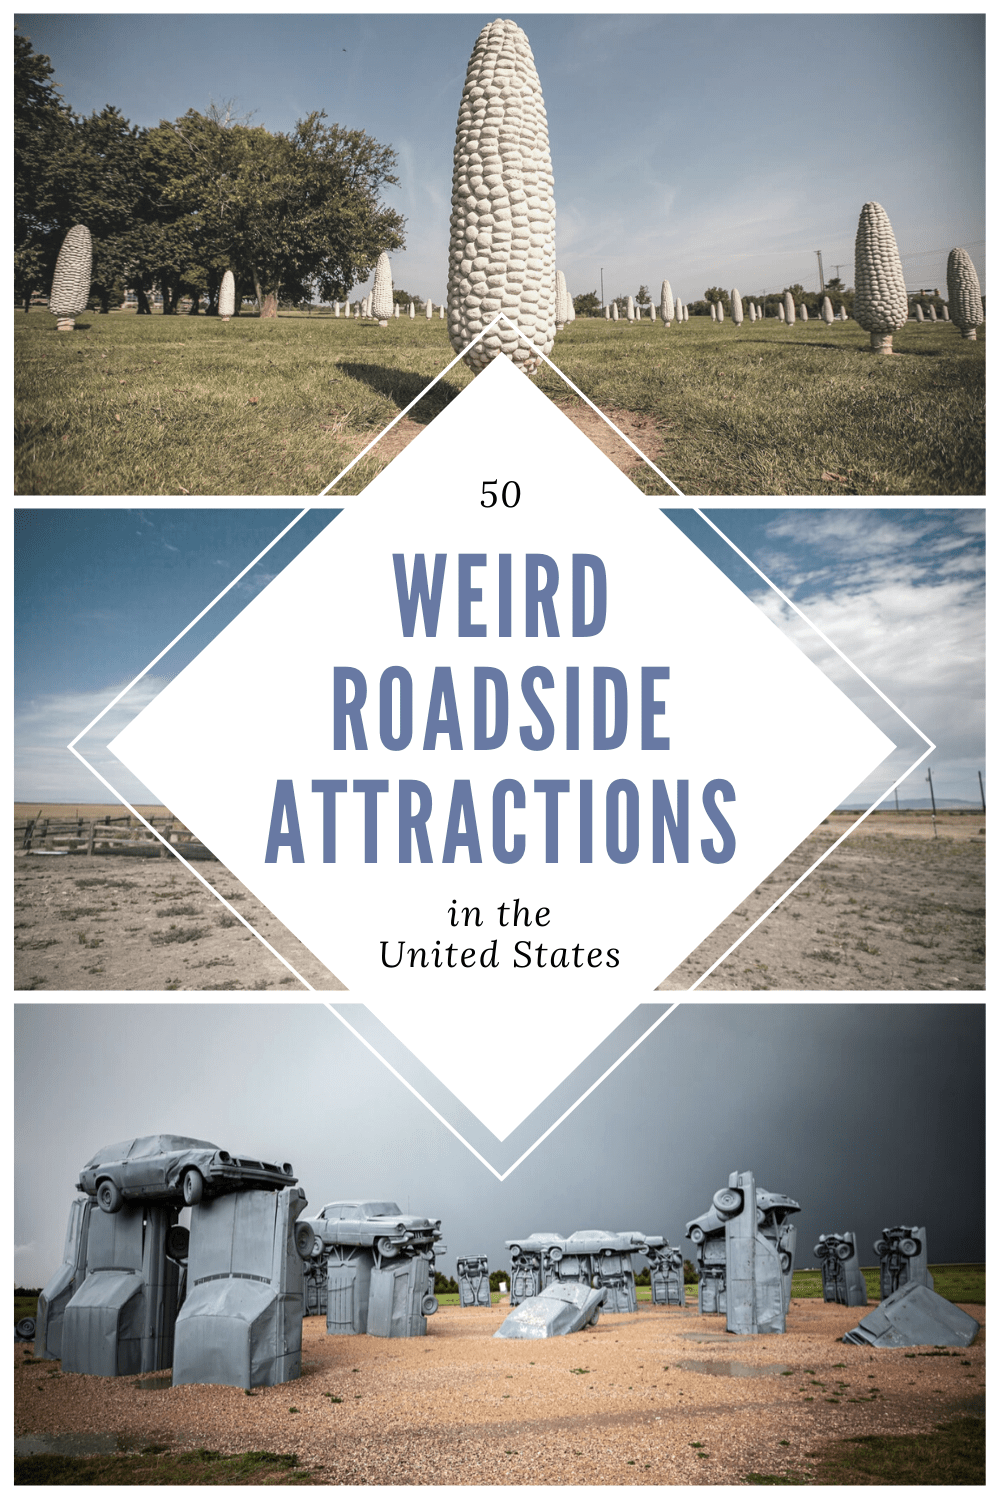 These weird roadside attractions make for fun stops on your next American road trip. Visit world's largest things, quirky outdoor art, and other oddities on a road trip around the United States! #RoadsideAttraction #RoadsideAttractions #WeirdRoadsideAttractions #VintageRoadsideAttractions #RoadTripStops #WorldsLargestRoadsideAttractions #RoadTrip #USARoadsideAttractions #AmericanRoadsideAttractions #USA #America